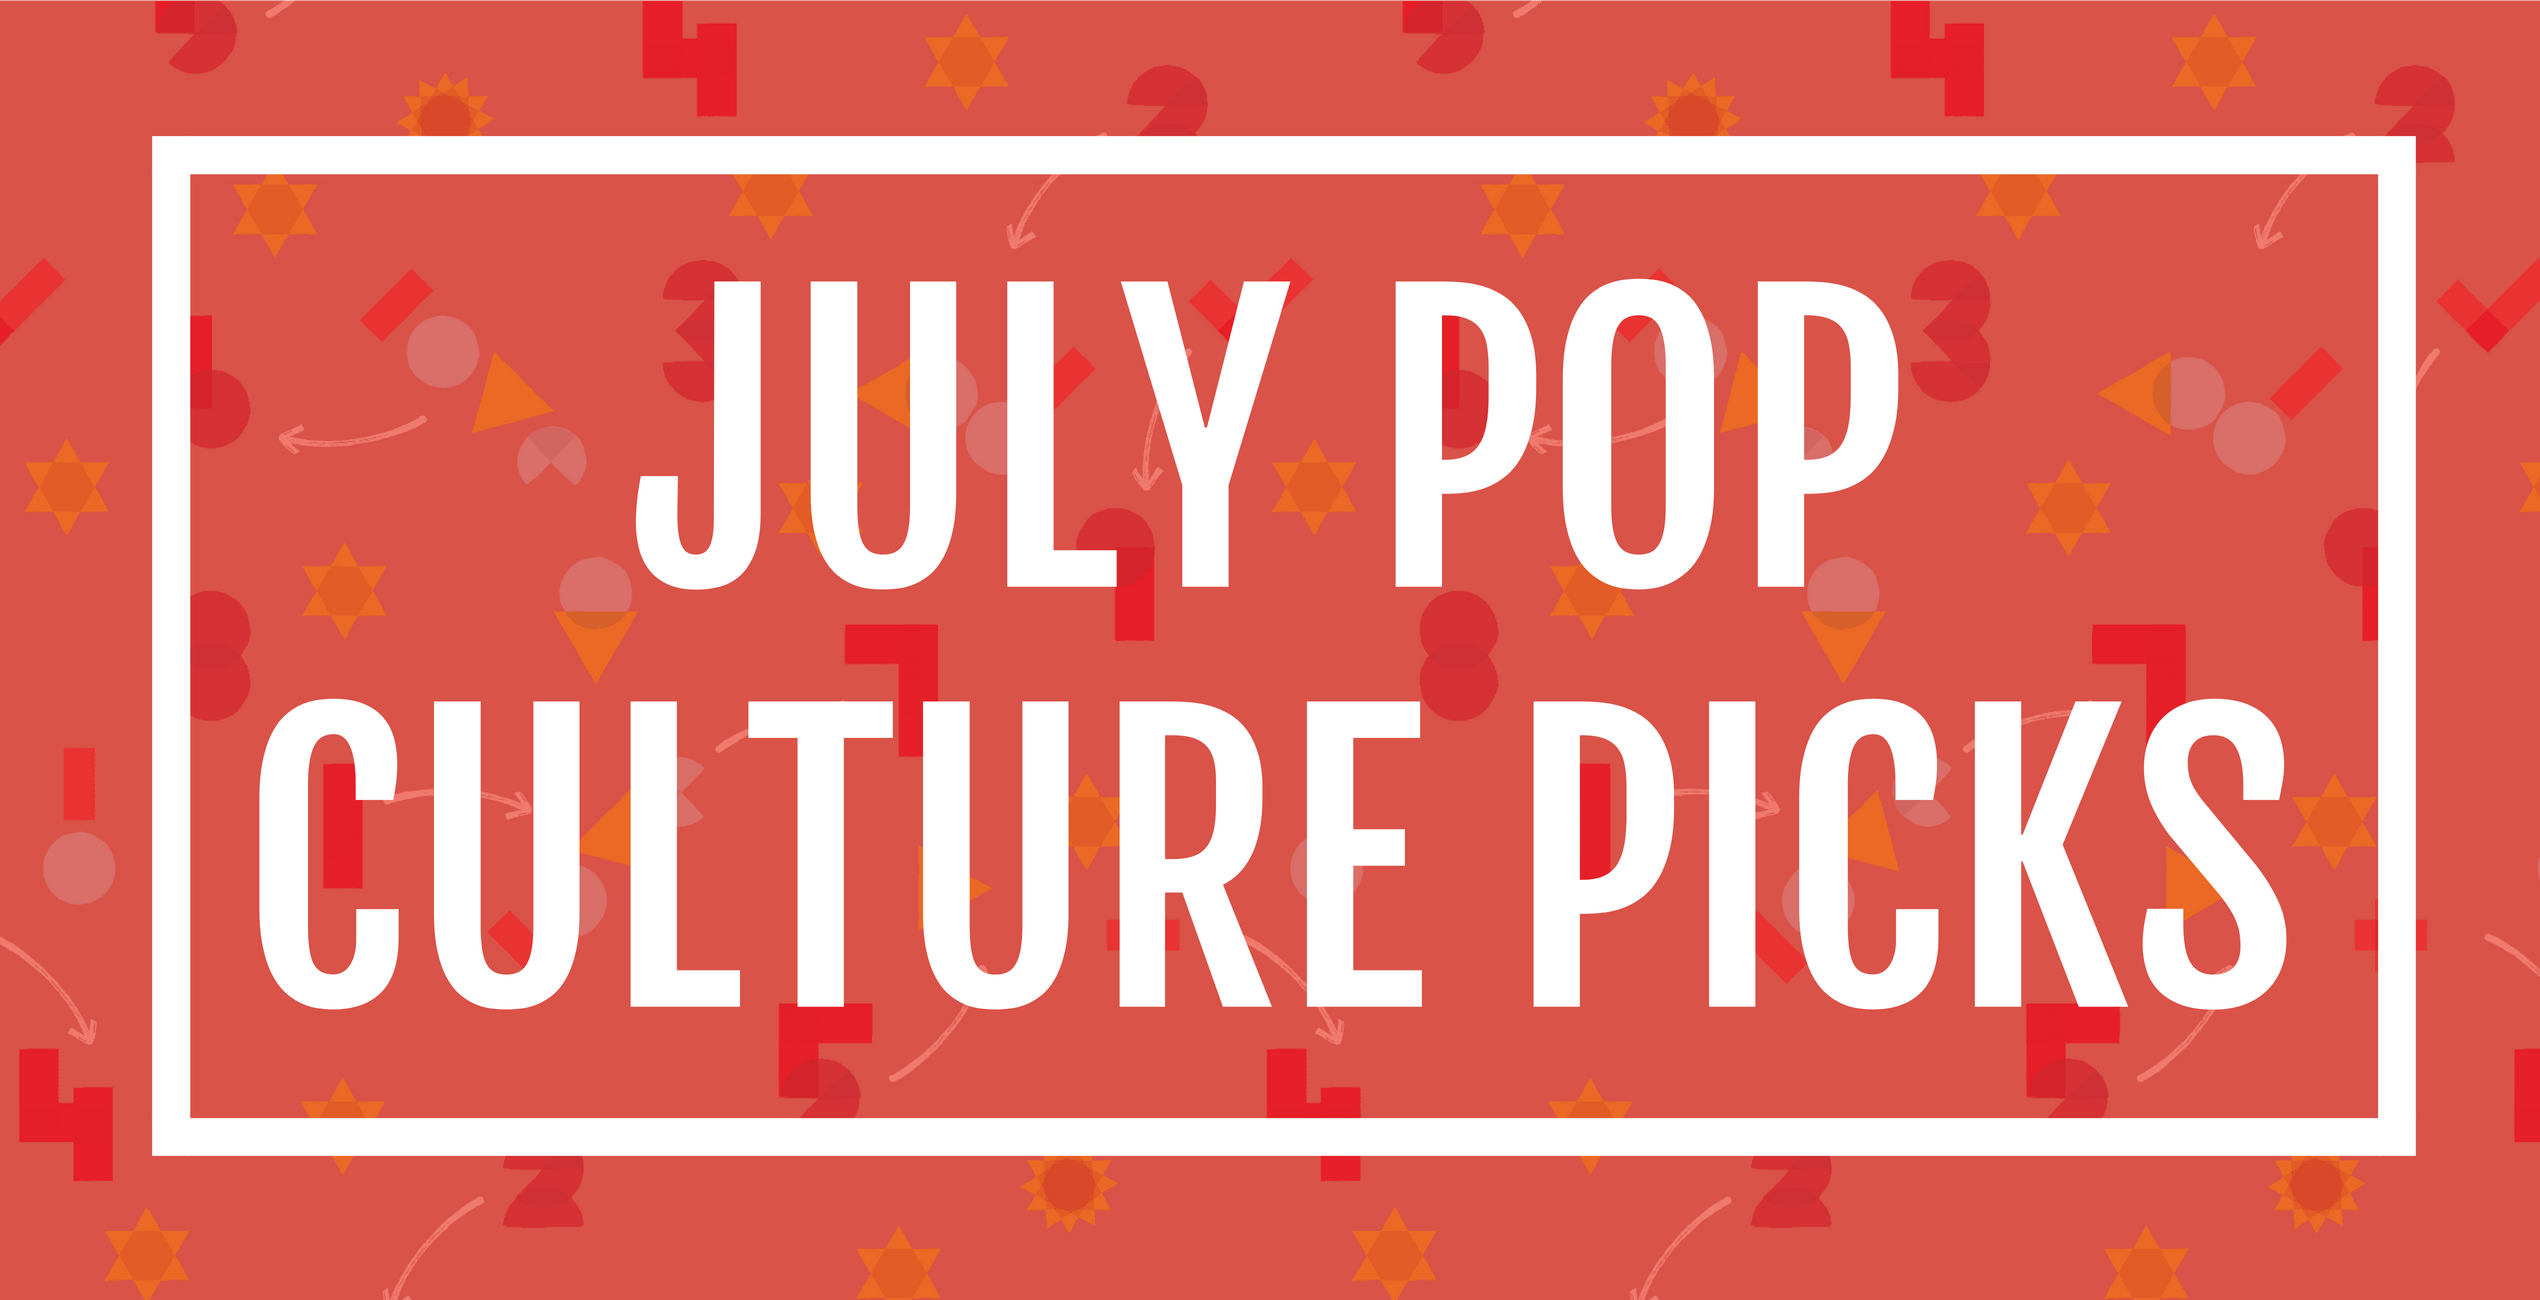 Our Pop Culture Picks for the month of July.